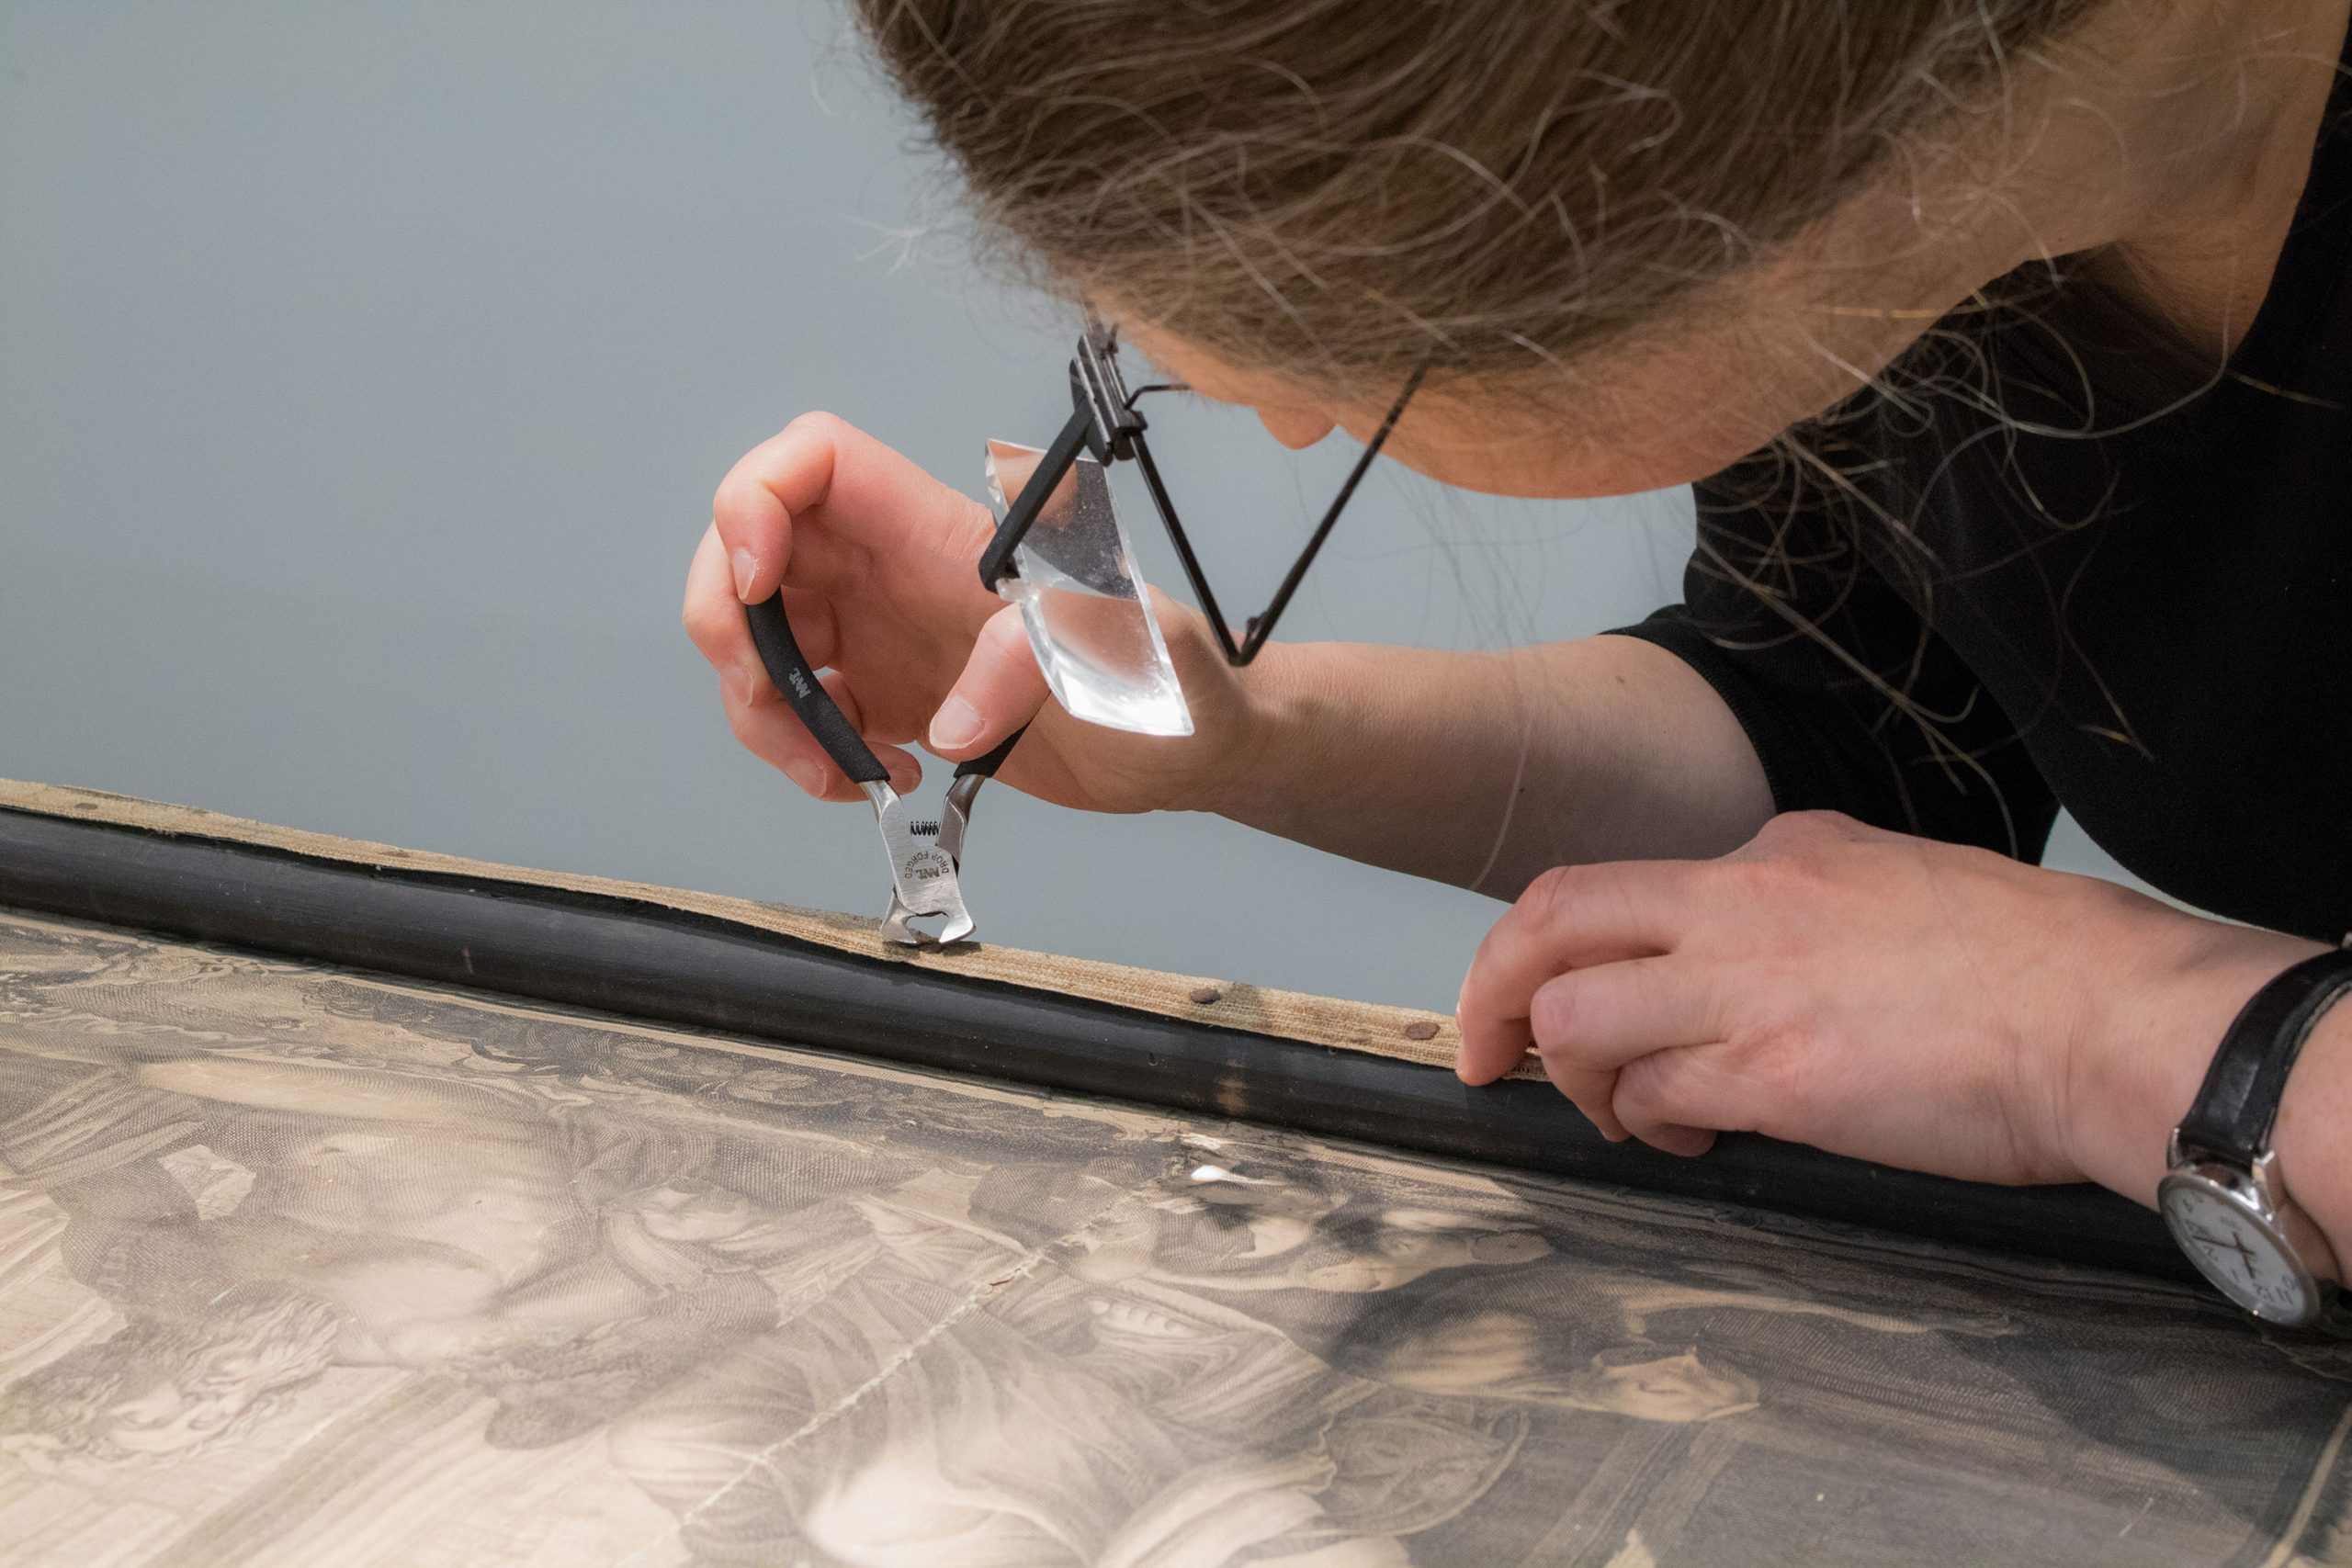 A practitioner carefully removes a canvas from a frame